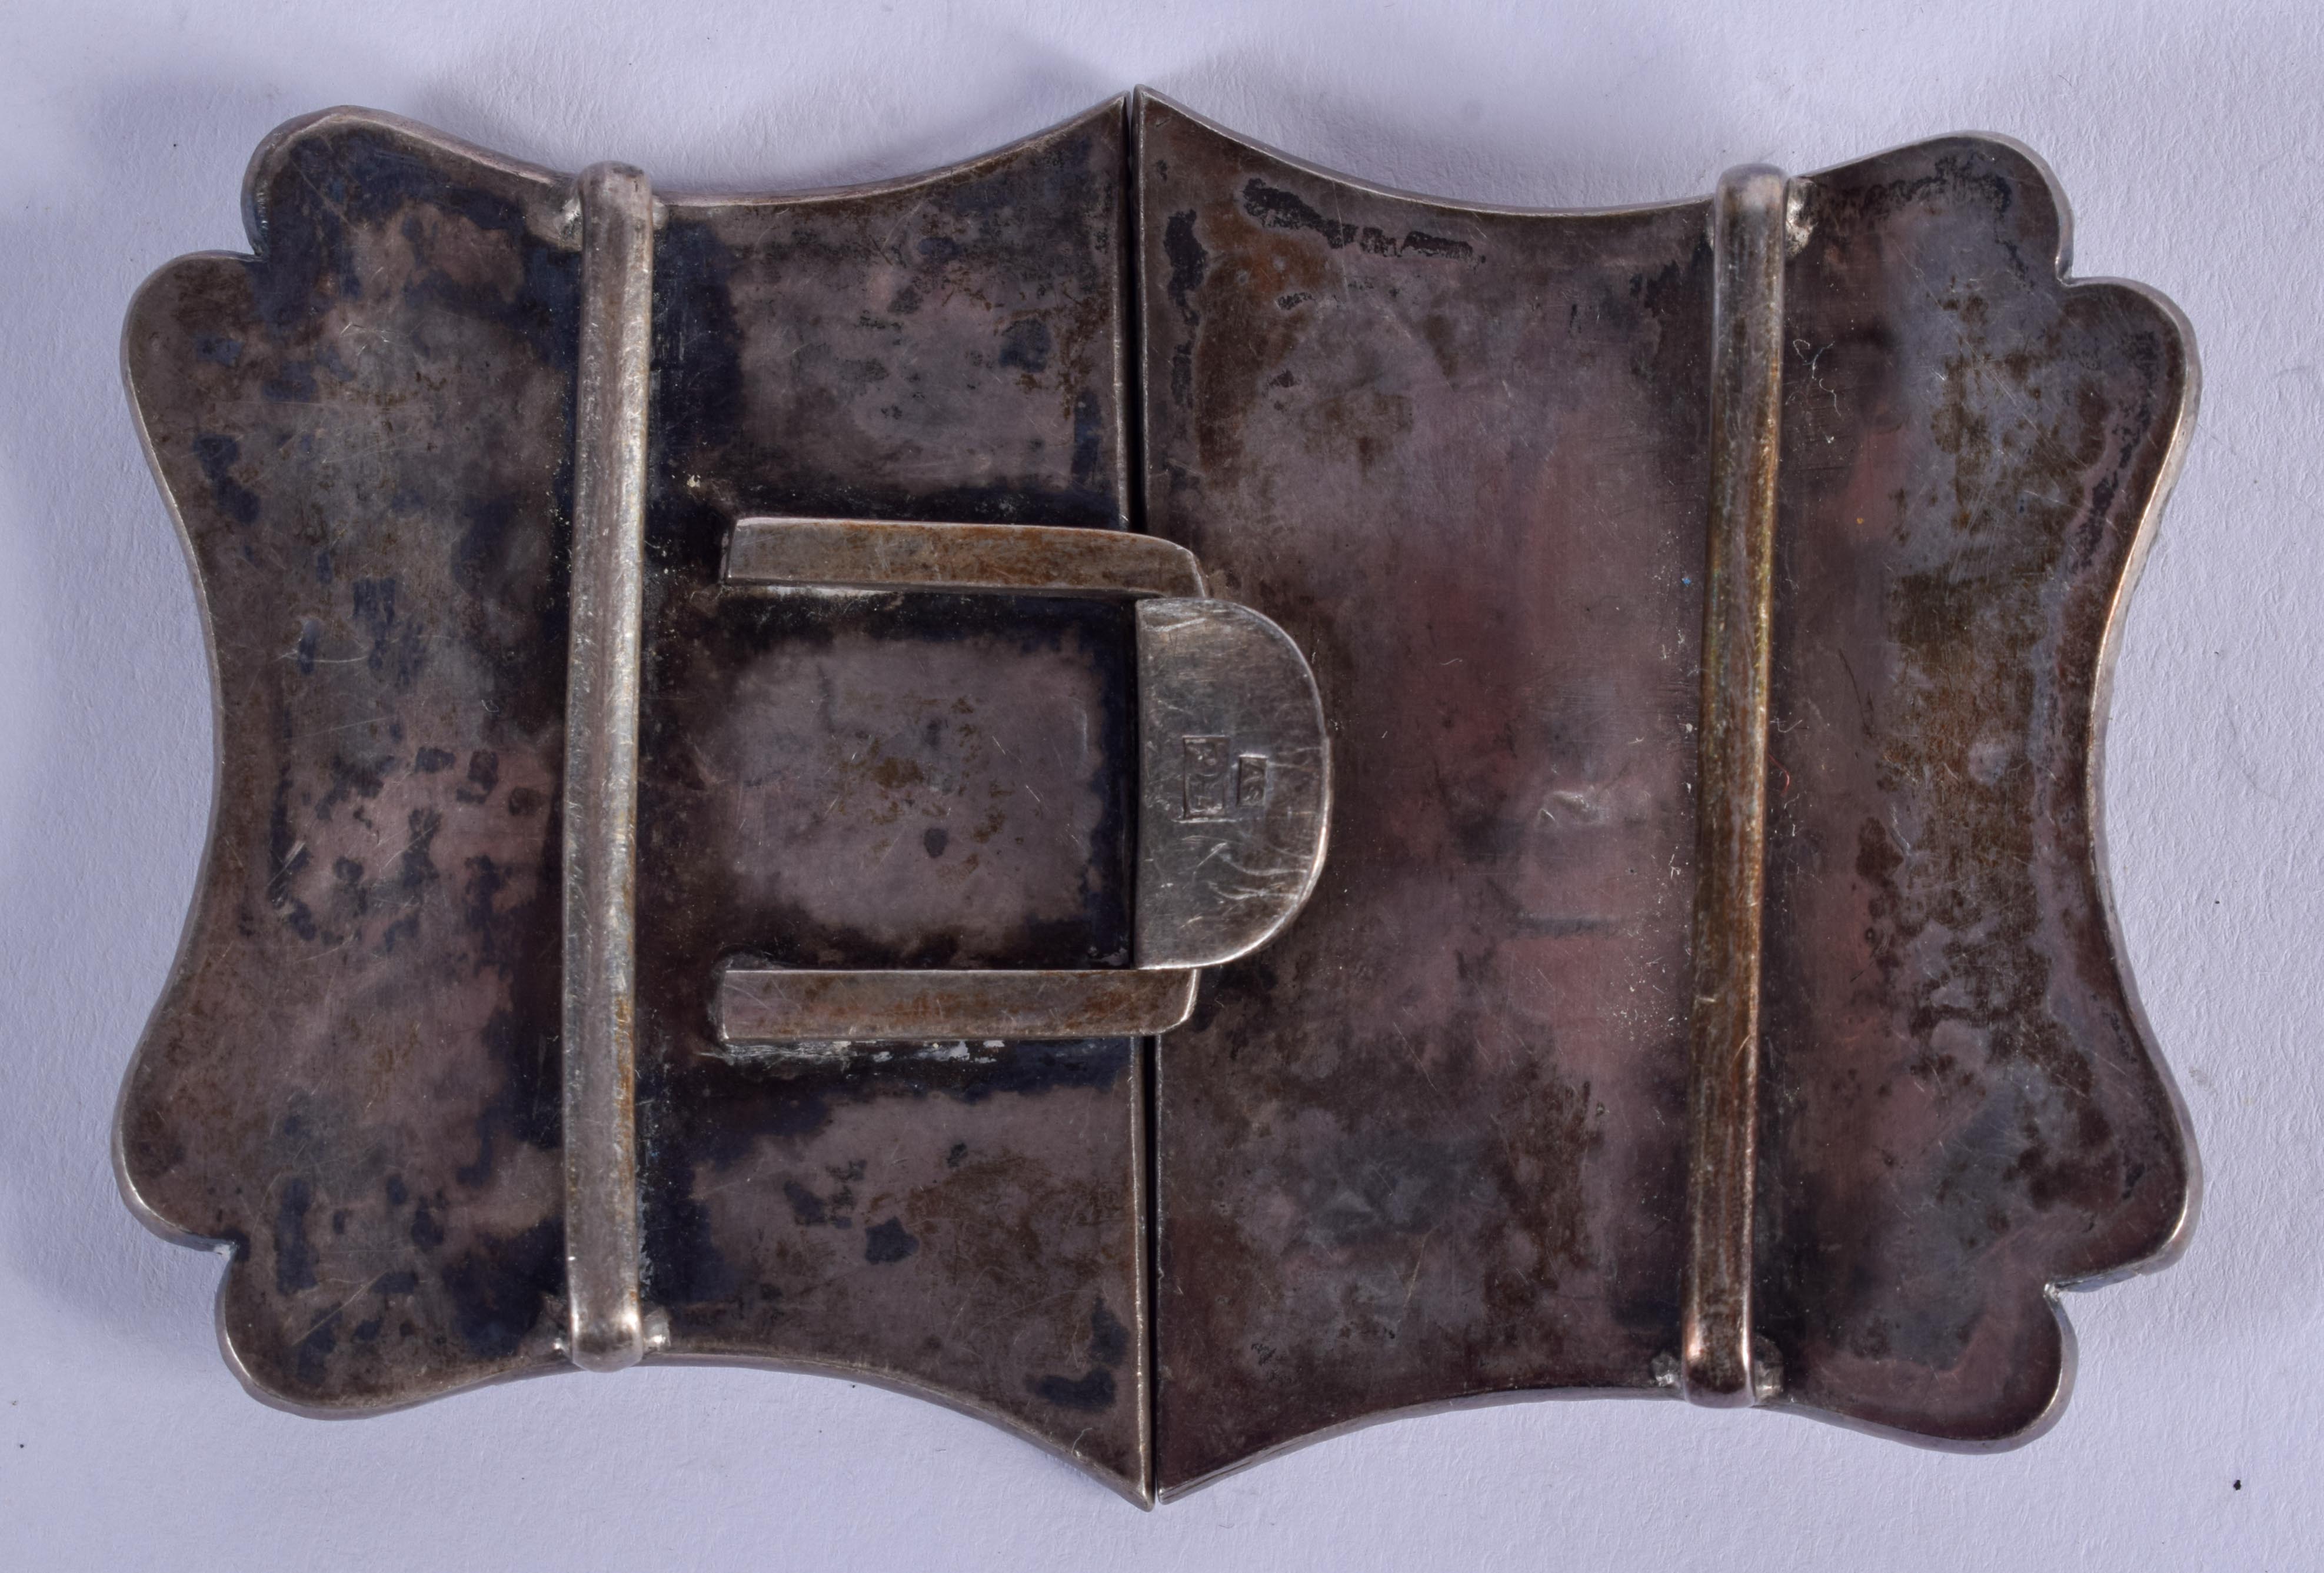 A 19TH CENTURY CHINESE EXPORT SILVER BUCKLE. 39 grams. 10 cm x 6 cm. - Image 2 of 3